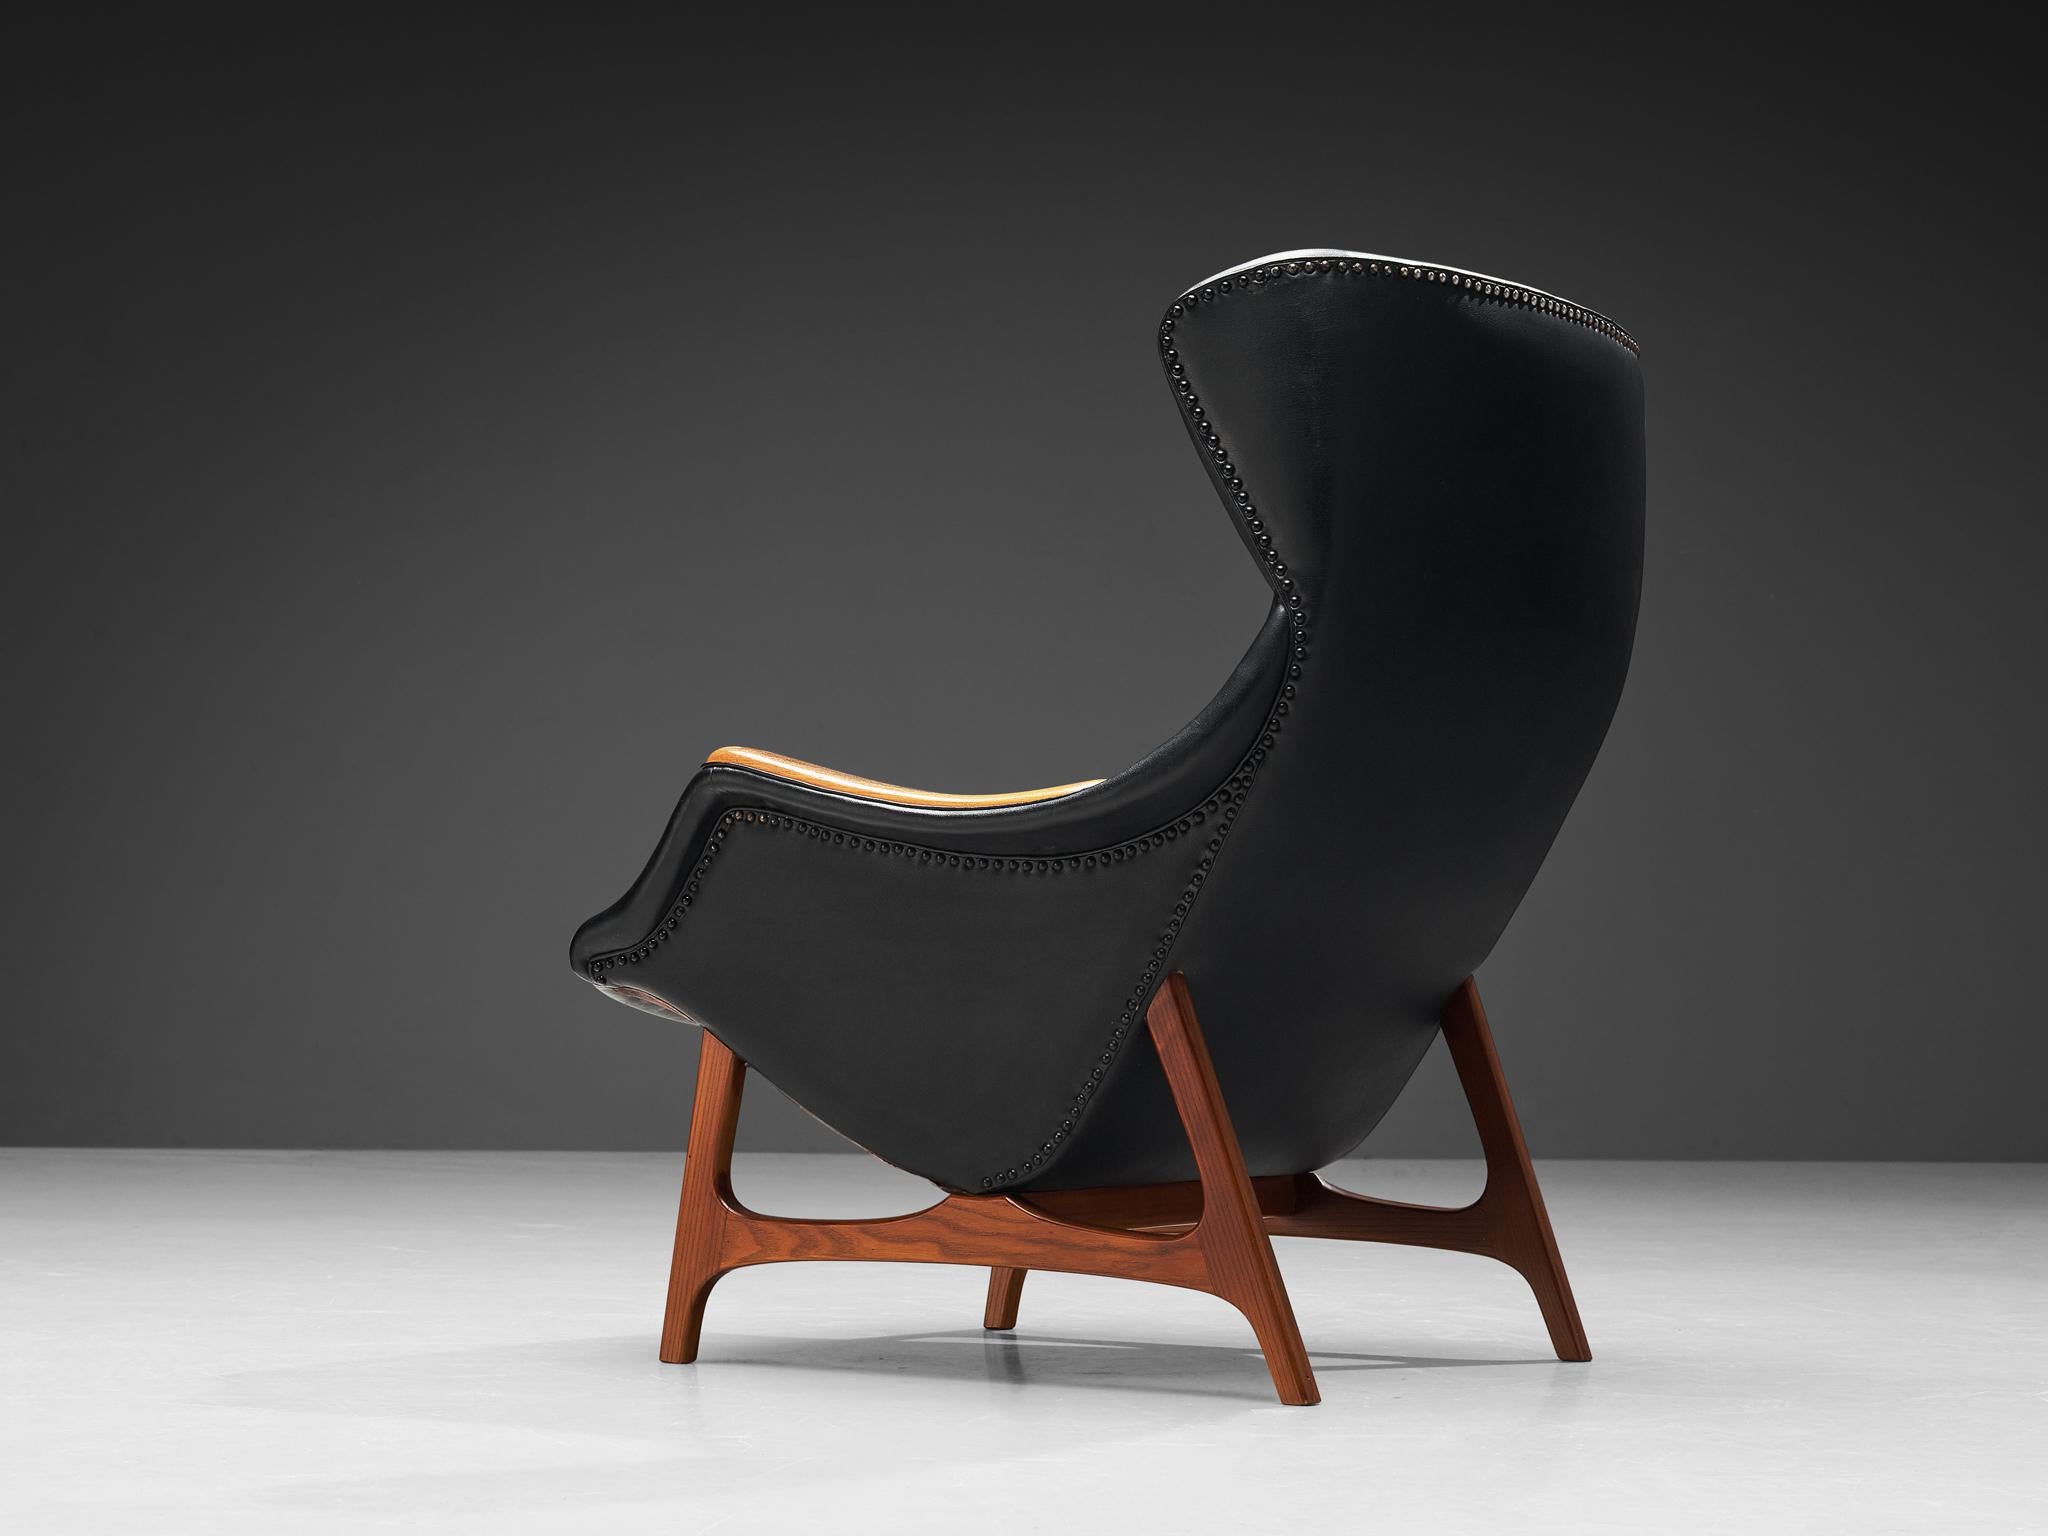 BJ. Hansen, lounge chair, leatherette, teak, metal, Norway, produced in Sjøholt, 1960s. 

This high-quality wingback chair is based on a solid construction featuring round and bold shapes. The seating is designed as a shell that embraces the sitter